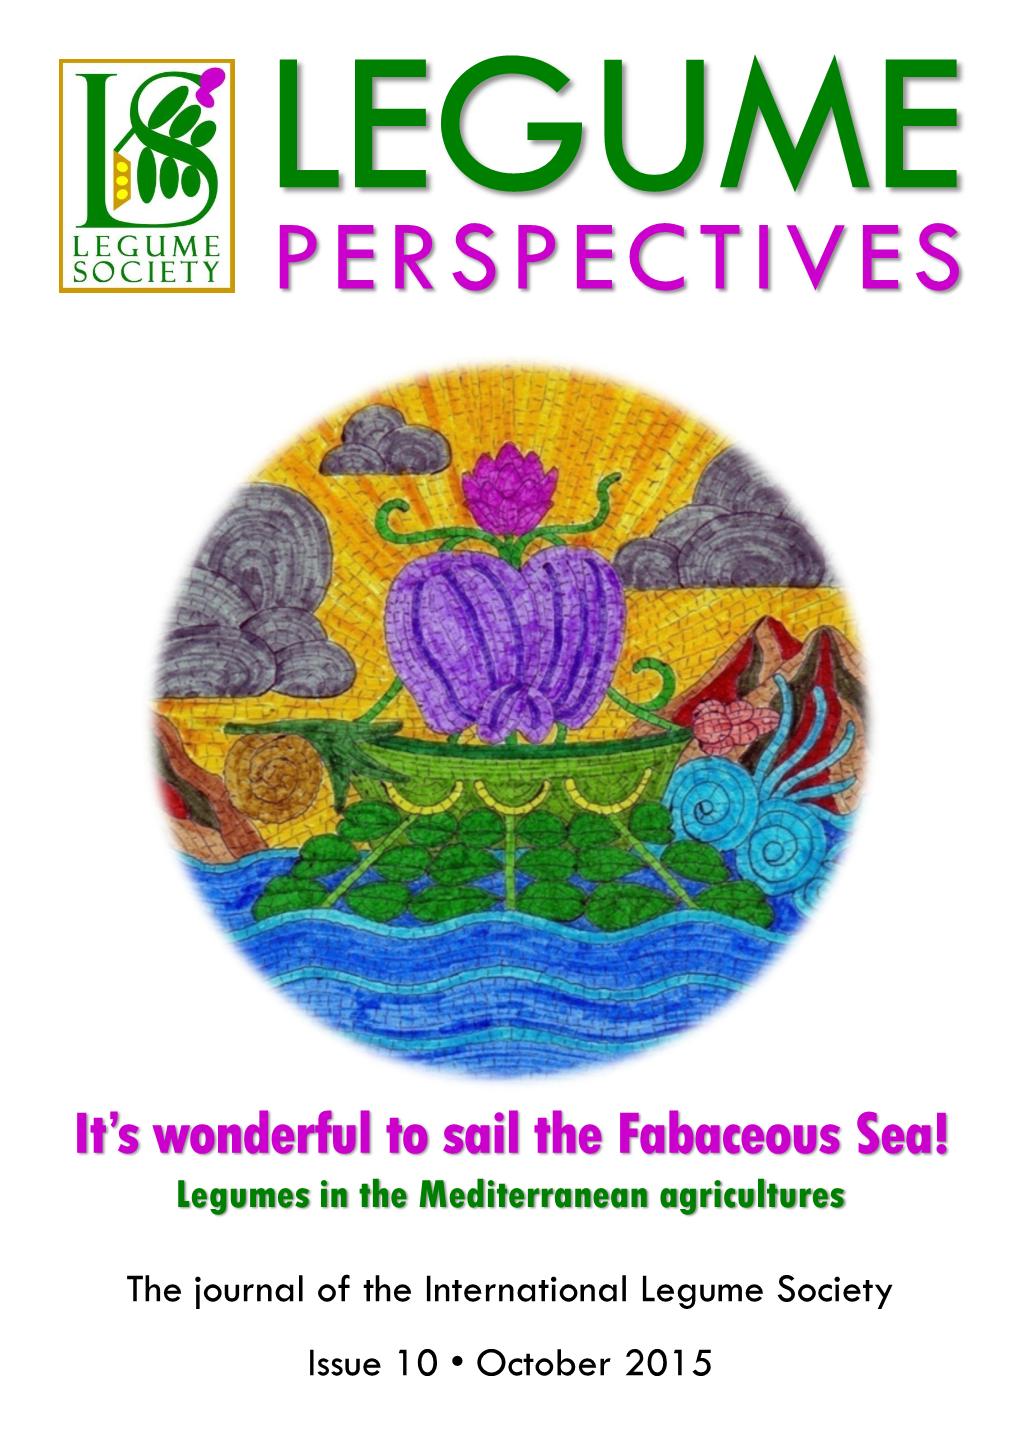 Legume Perspectives Issue 10 Is Available